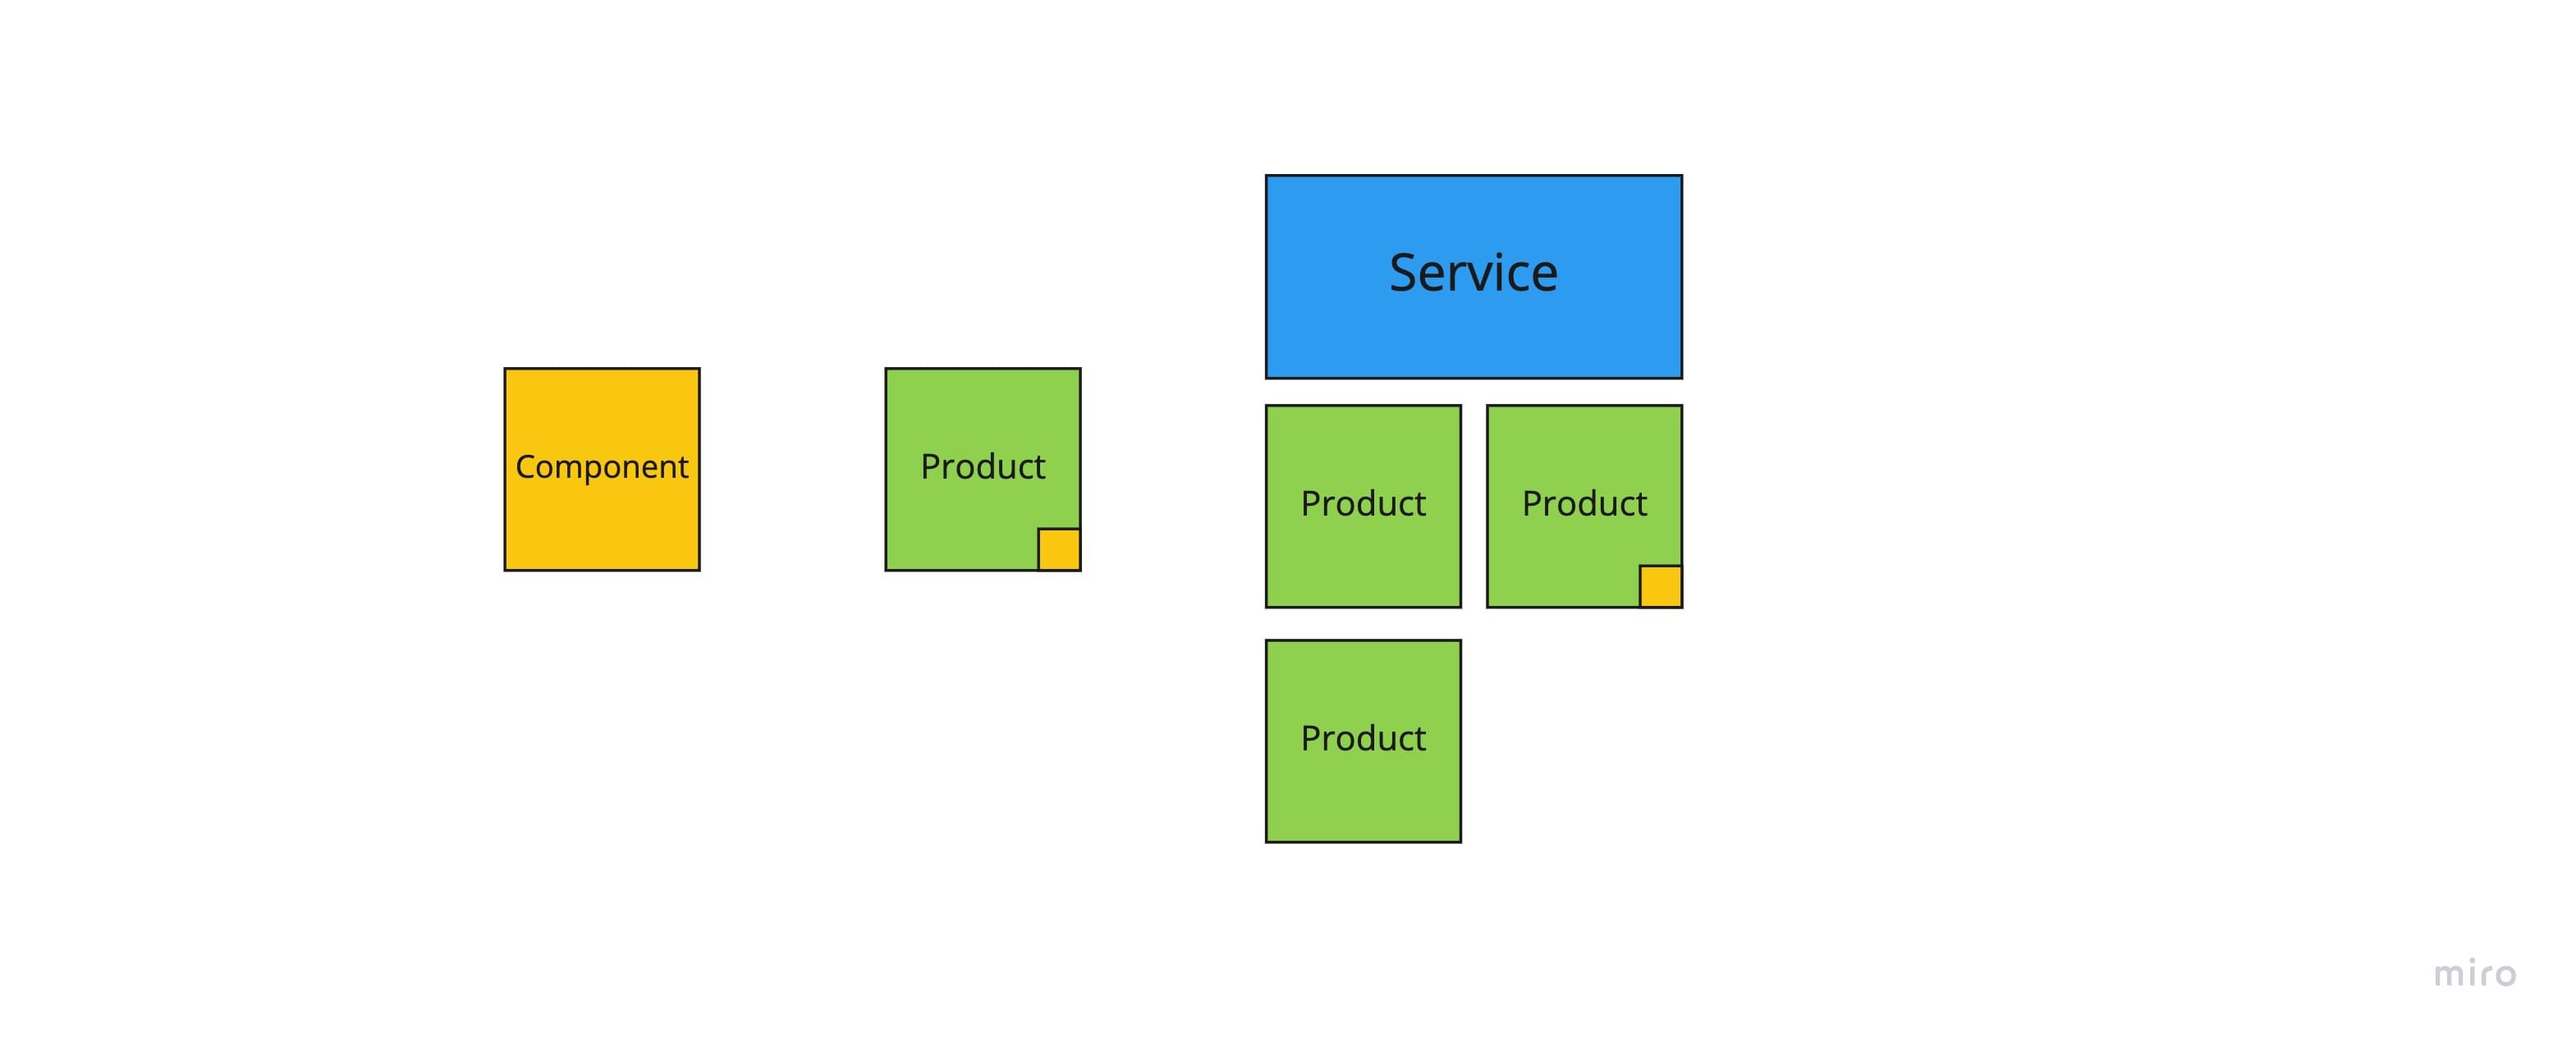 Component, Product and Service diagram